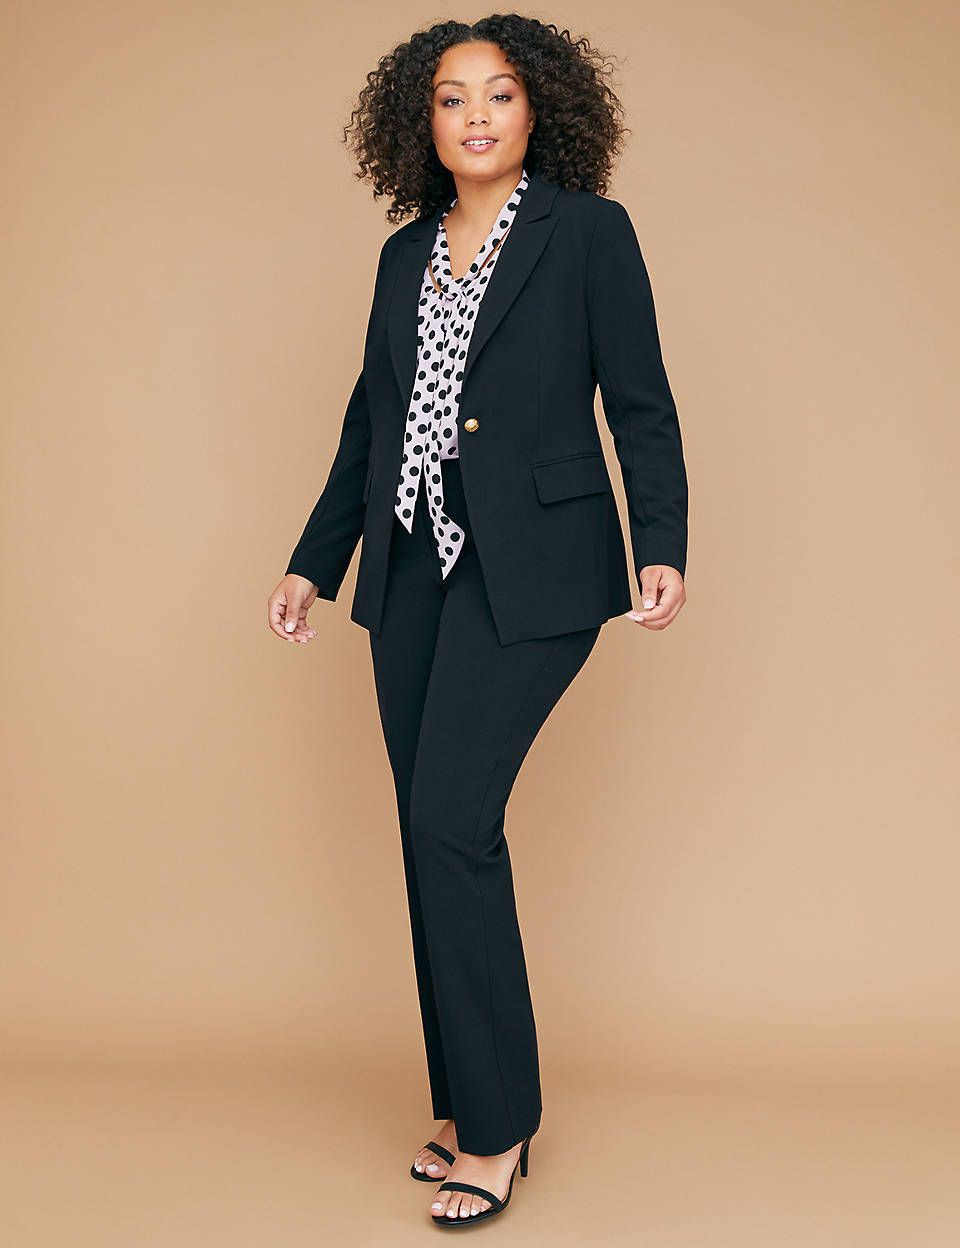 Stylish Formal Outfits Ideas For Office: Plus size outfit,  Summer Work Outfit,  Casual Summer Work Outfit,  professional Outfit For Teens  